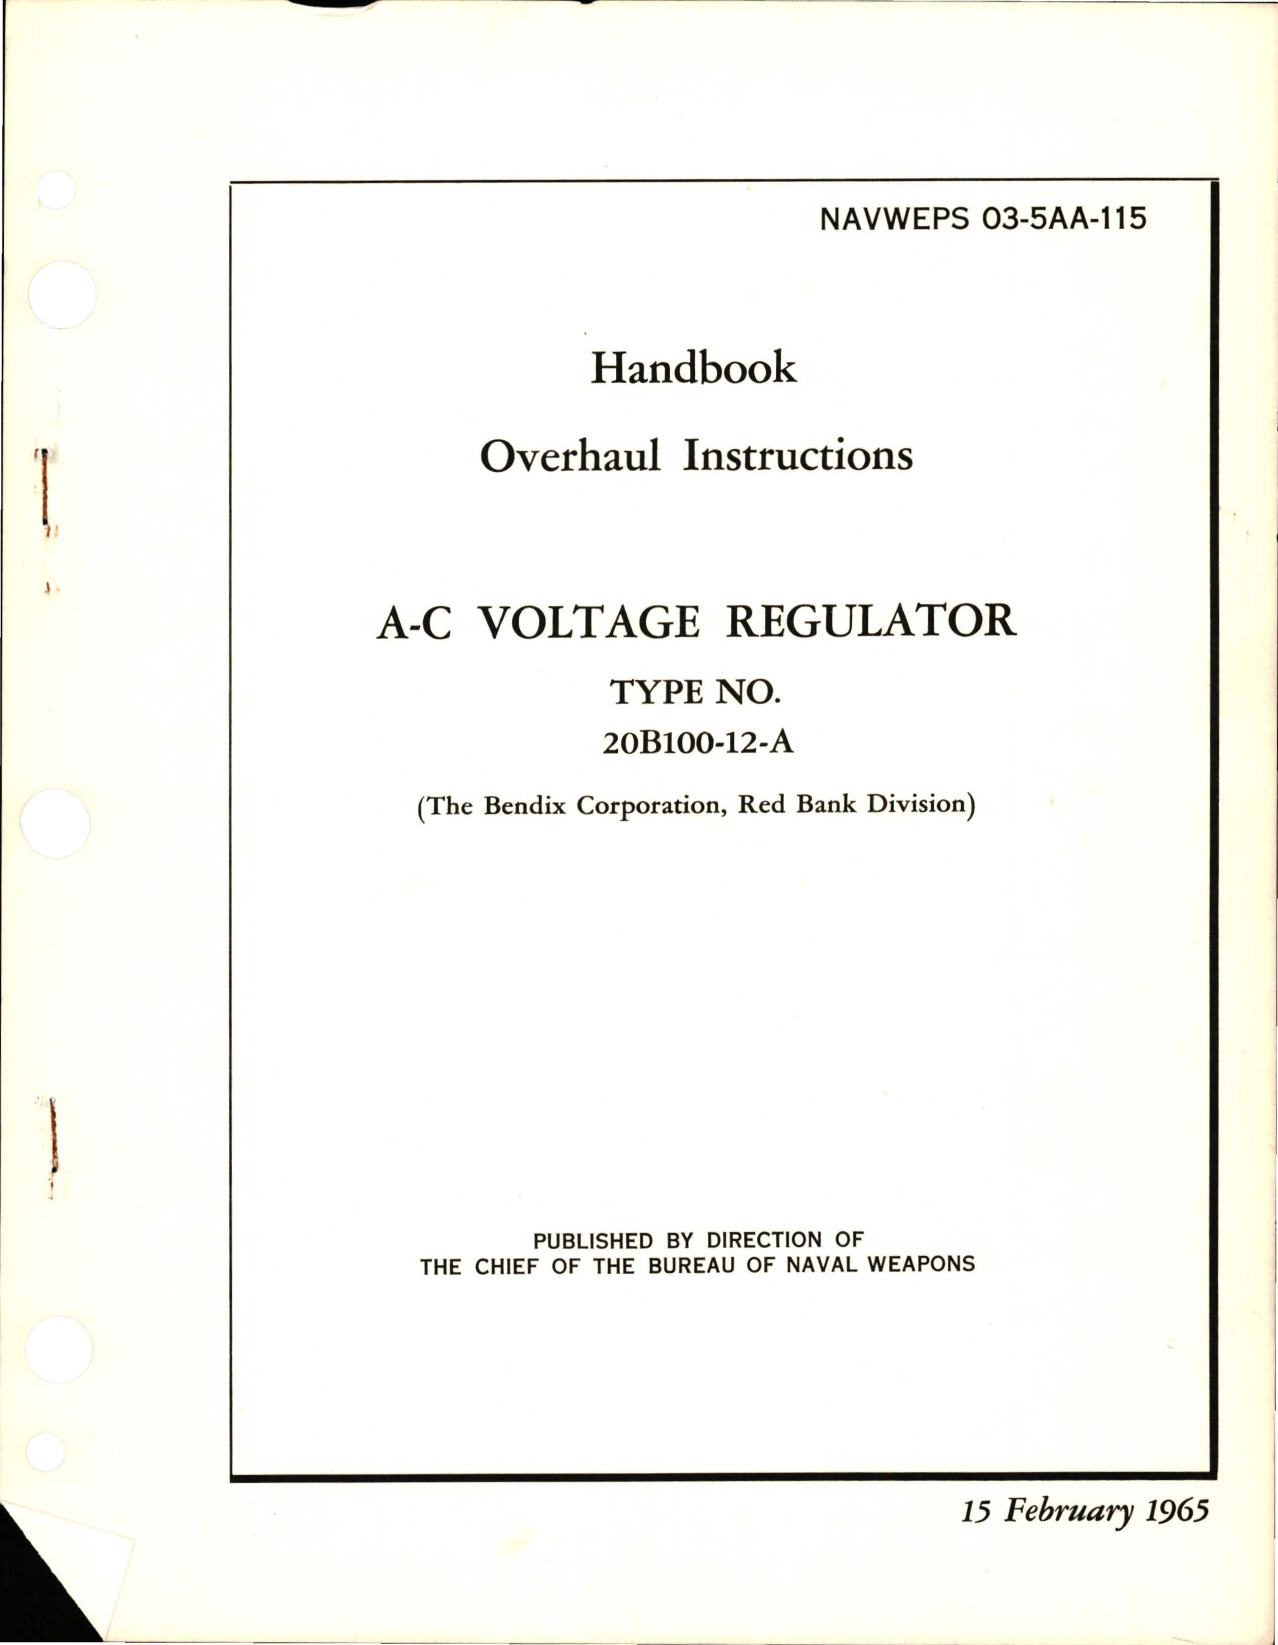 Sample page 1 from AirCorps Library document: Overhaul Instructions for A-C Voltage Regulator - Type 20B100-12-A 